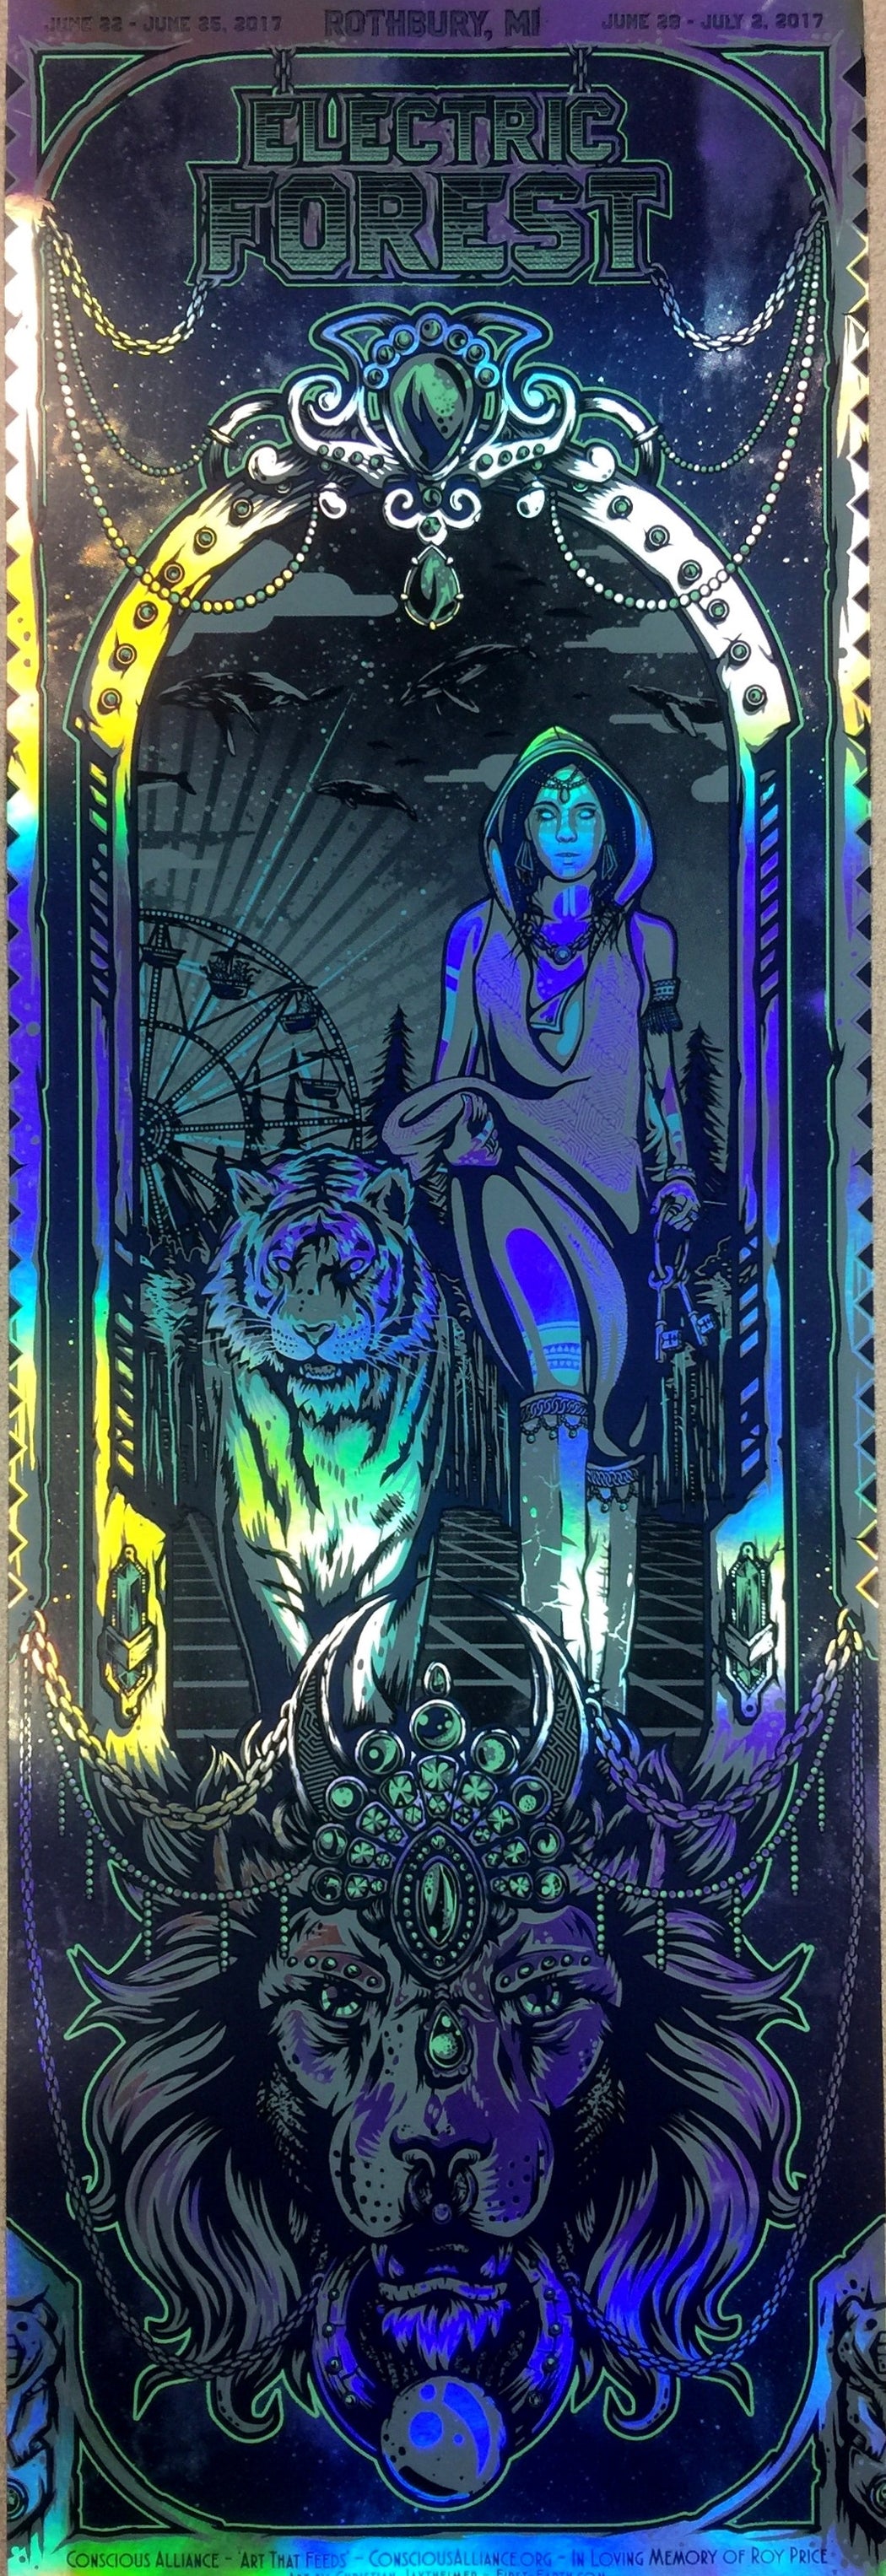 Electric Forest - 2017 (LION)